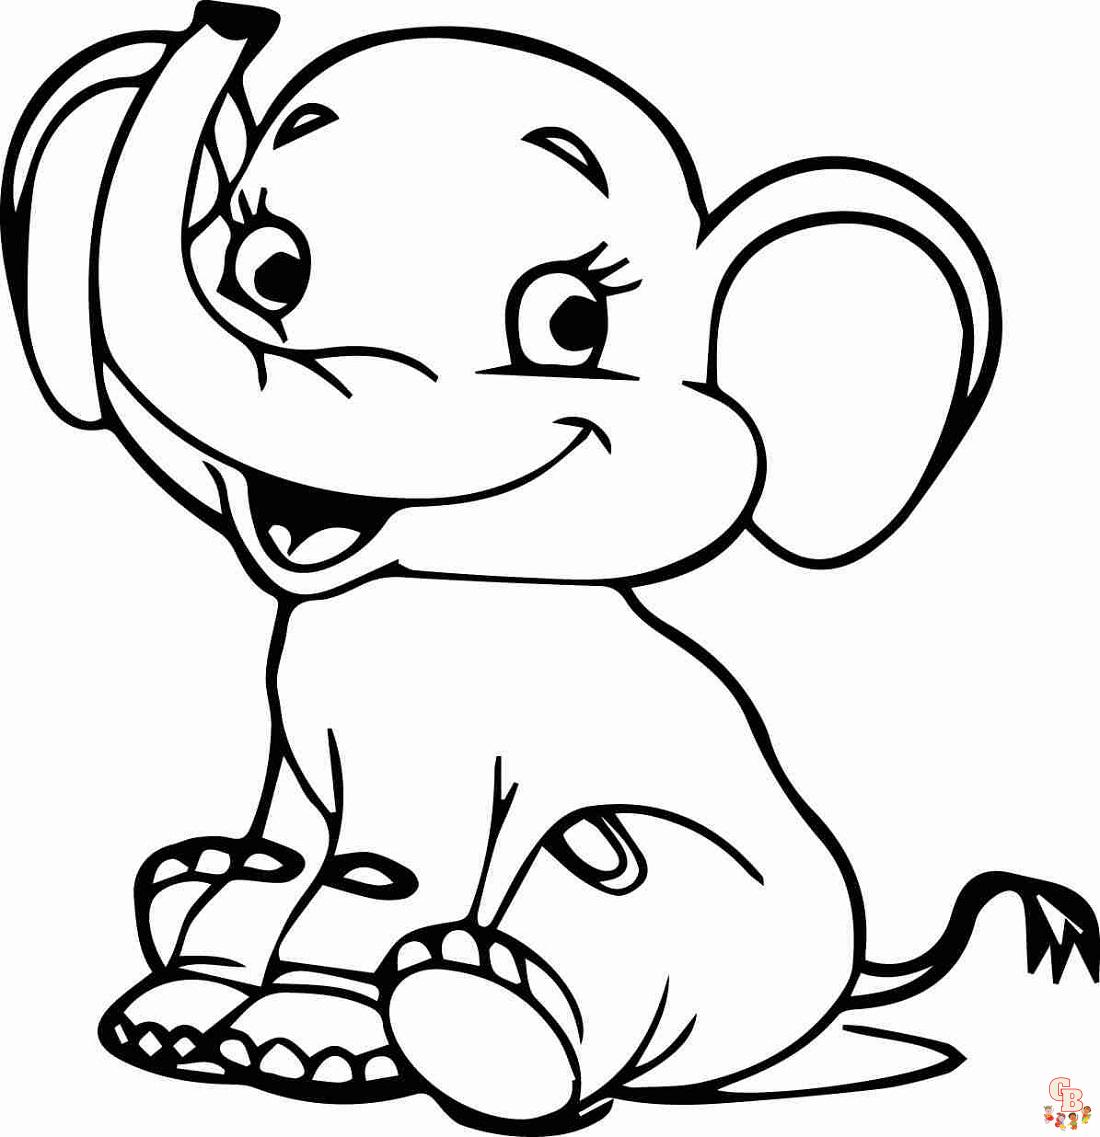 Cute Elephant Coloring Pages - Printable Free and Easy for Kids